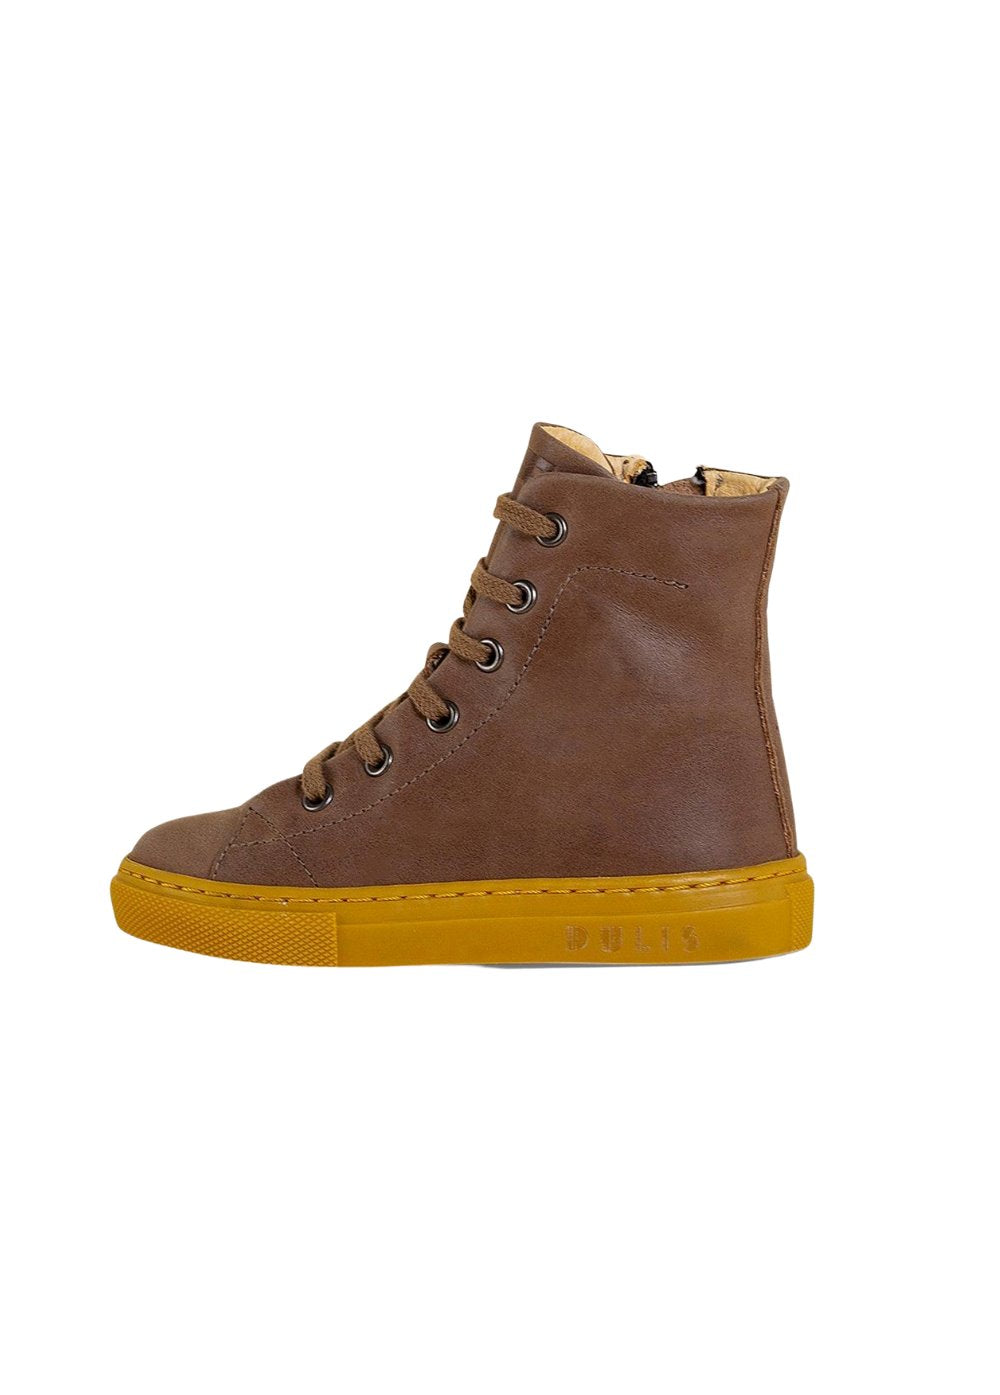 Camel High Top Sneakers Shoes Dulis Shoes 